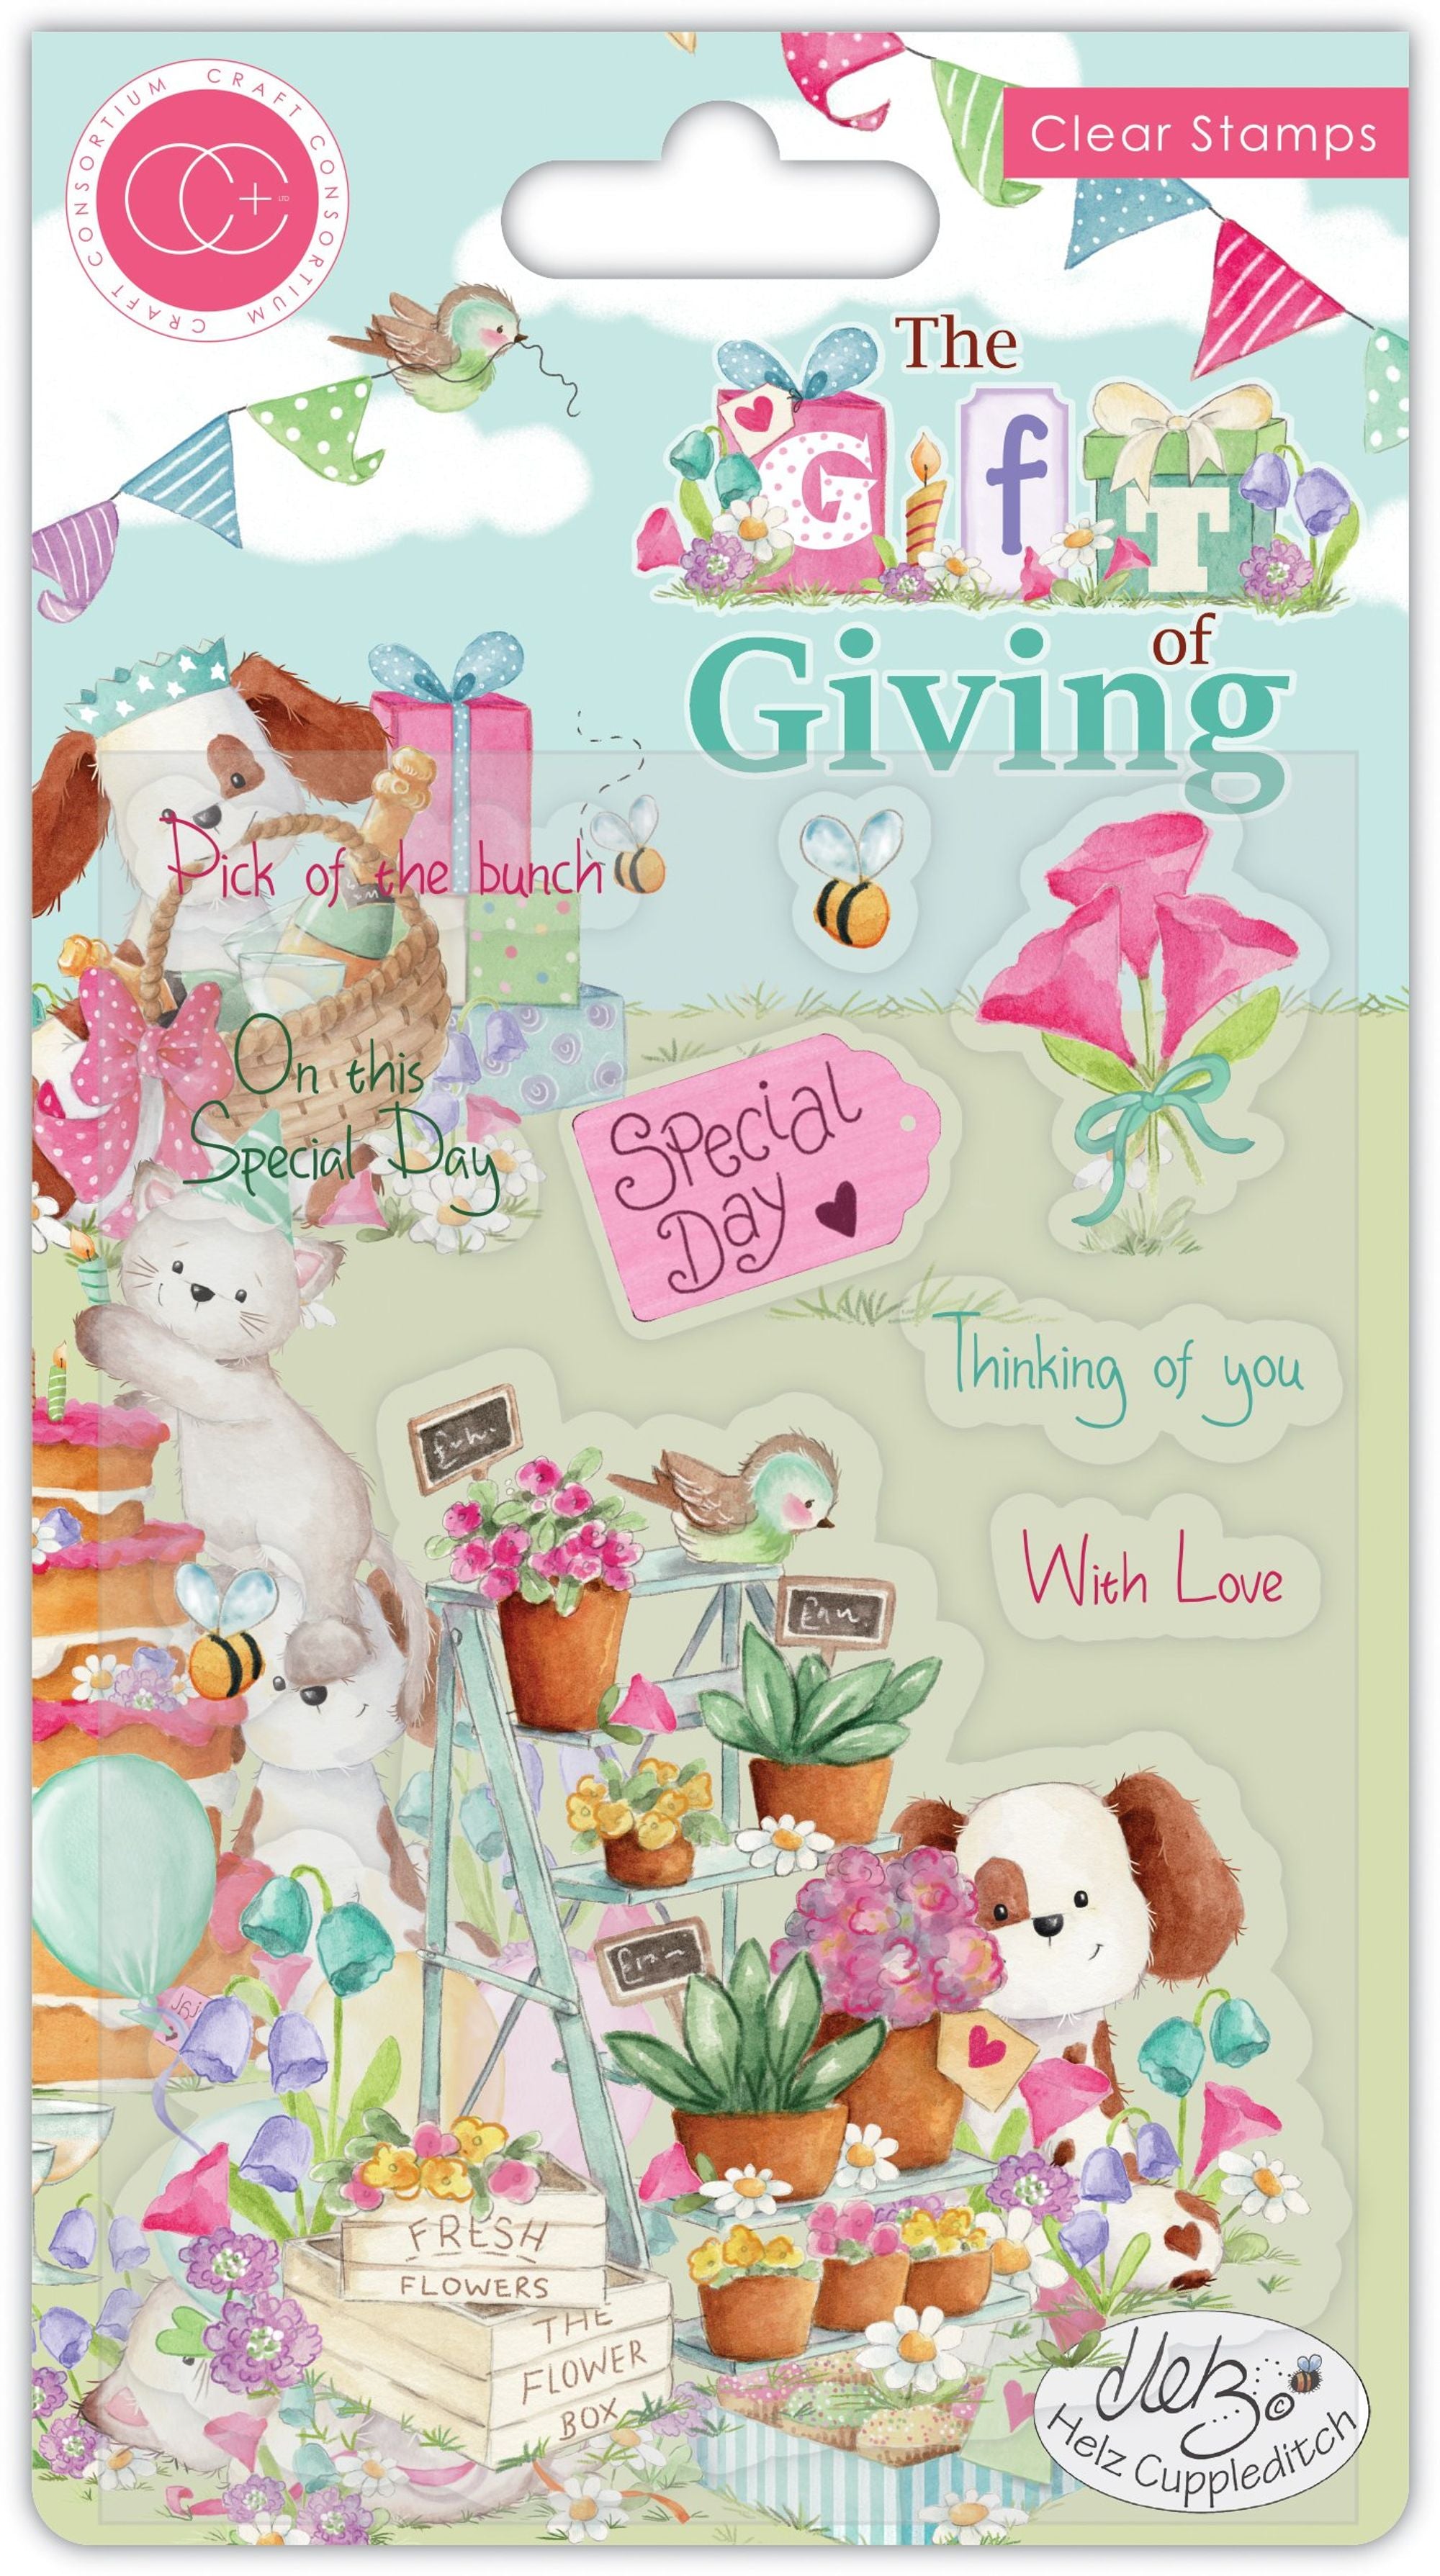 The Gift of Giving Stamp Set - Pick of the Bunch